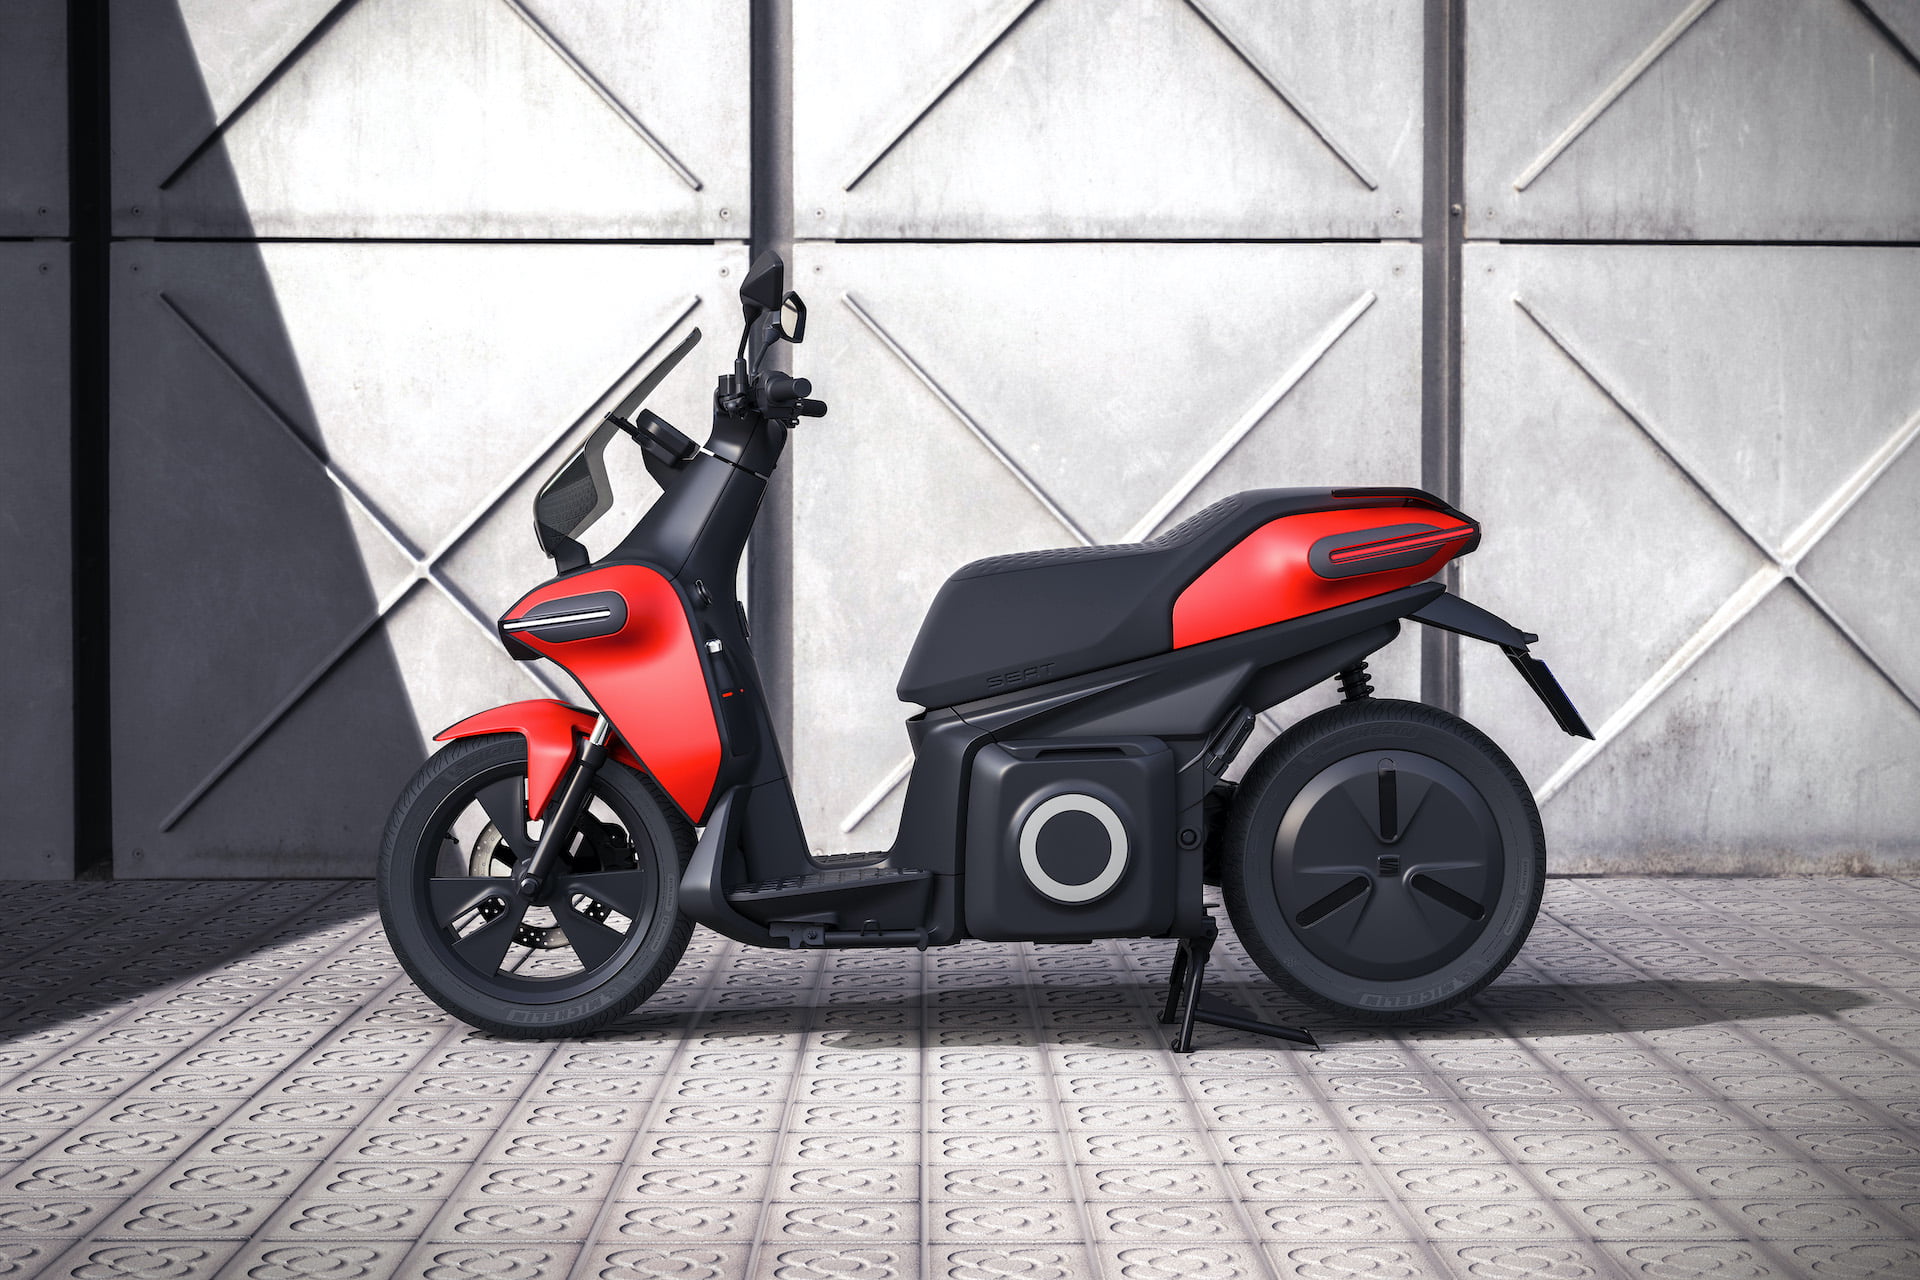 SEAT creates a business unit to promote urban mobility and presents its e Scooter concept 05 HQ